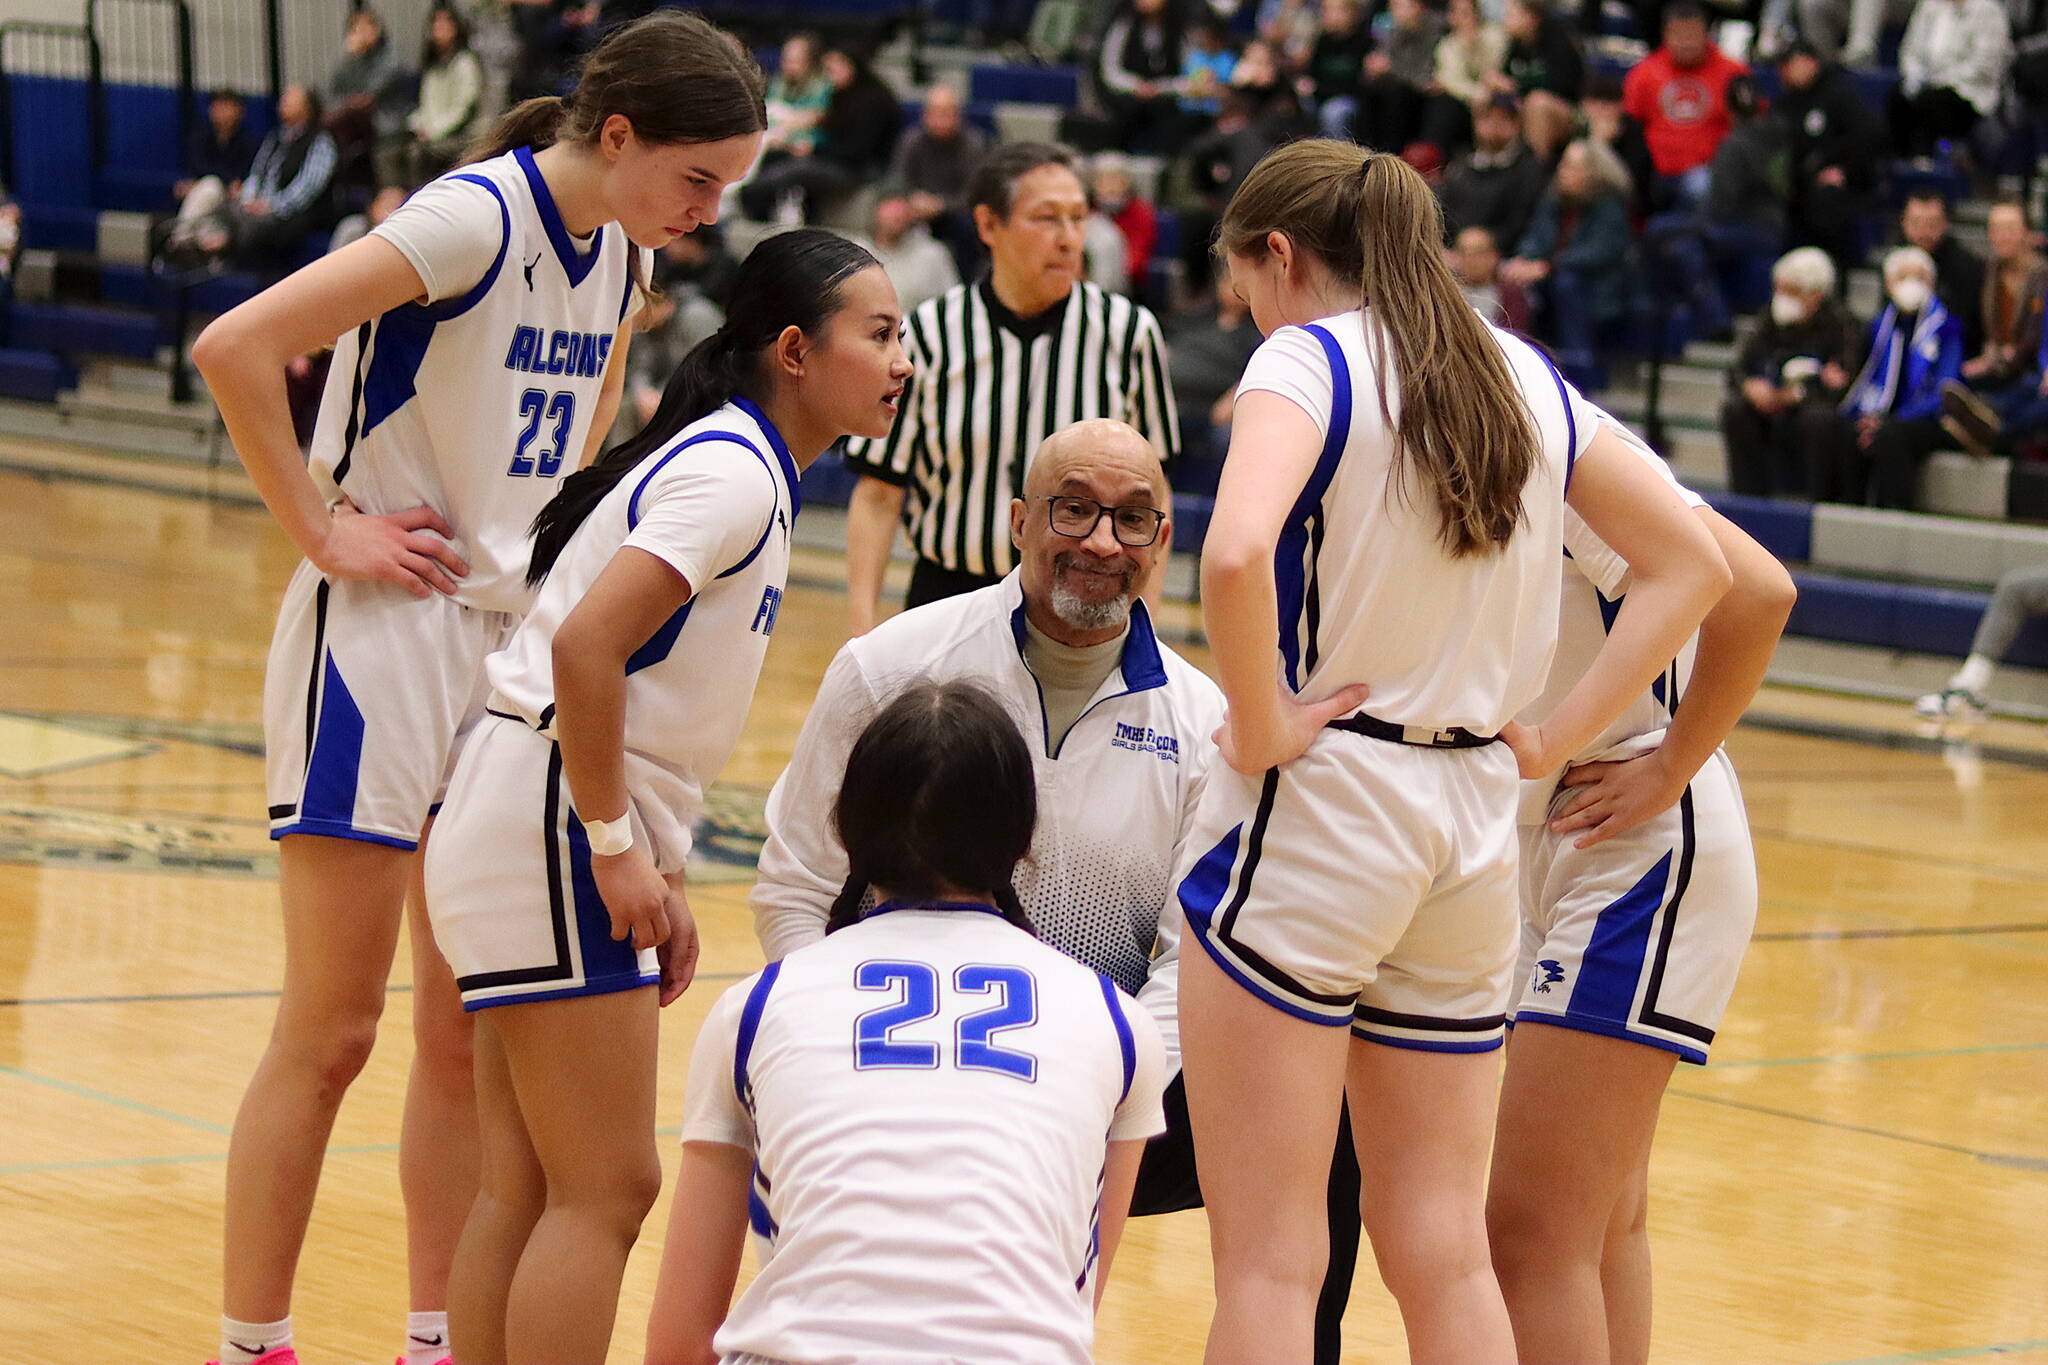 Thunder Mountain High School Head Coach Andy Lee confers with his players during a timeout in Saturday’s game against Ketchikan High School at TMHS. (Mark Sabbatini / Juneau Empire)